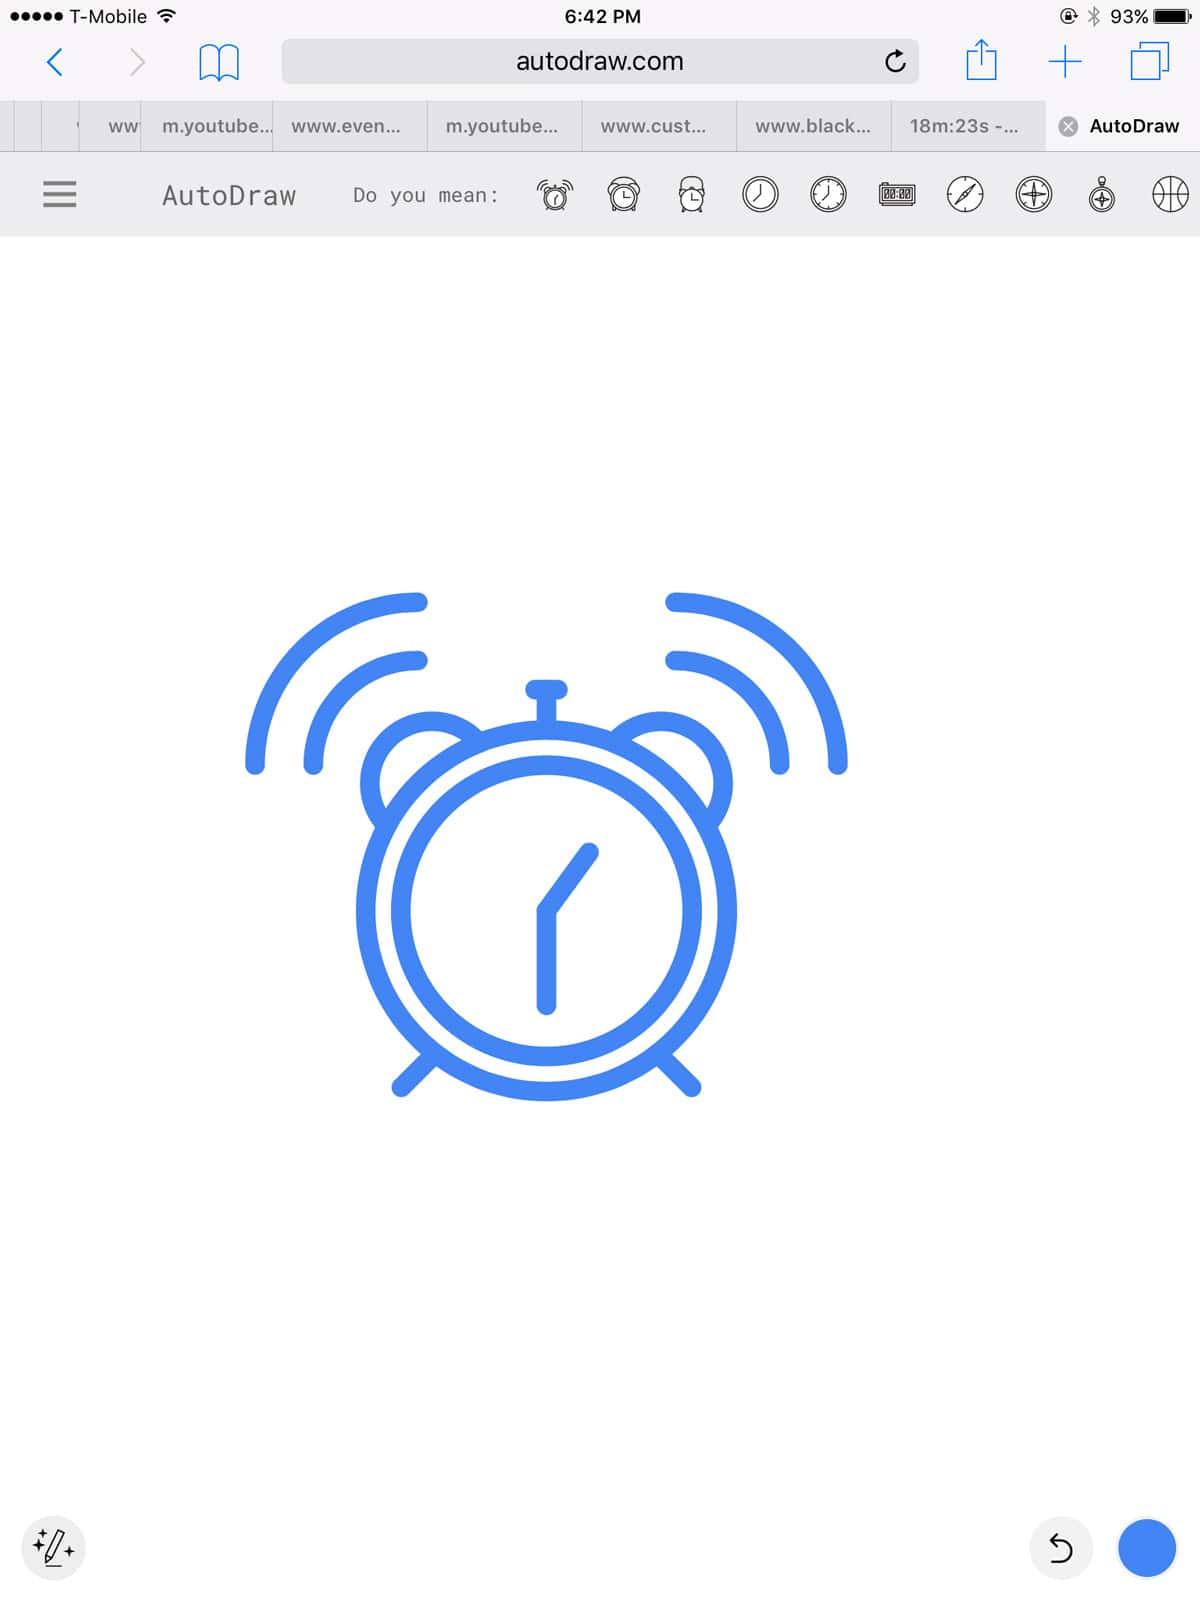 AutoDraw Suggestion of a clock